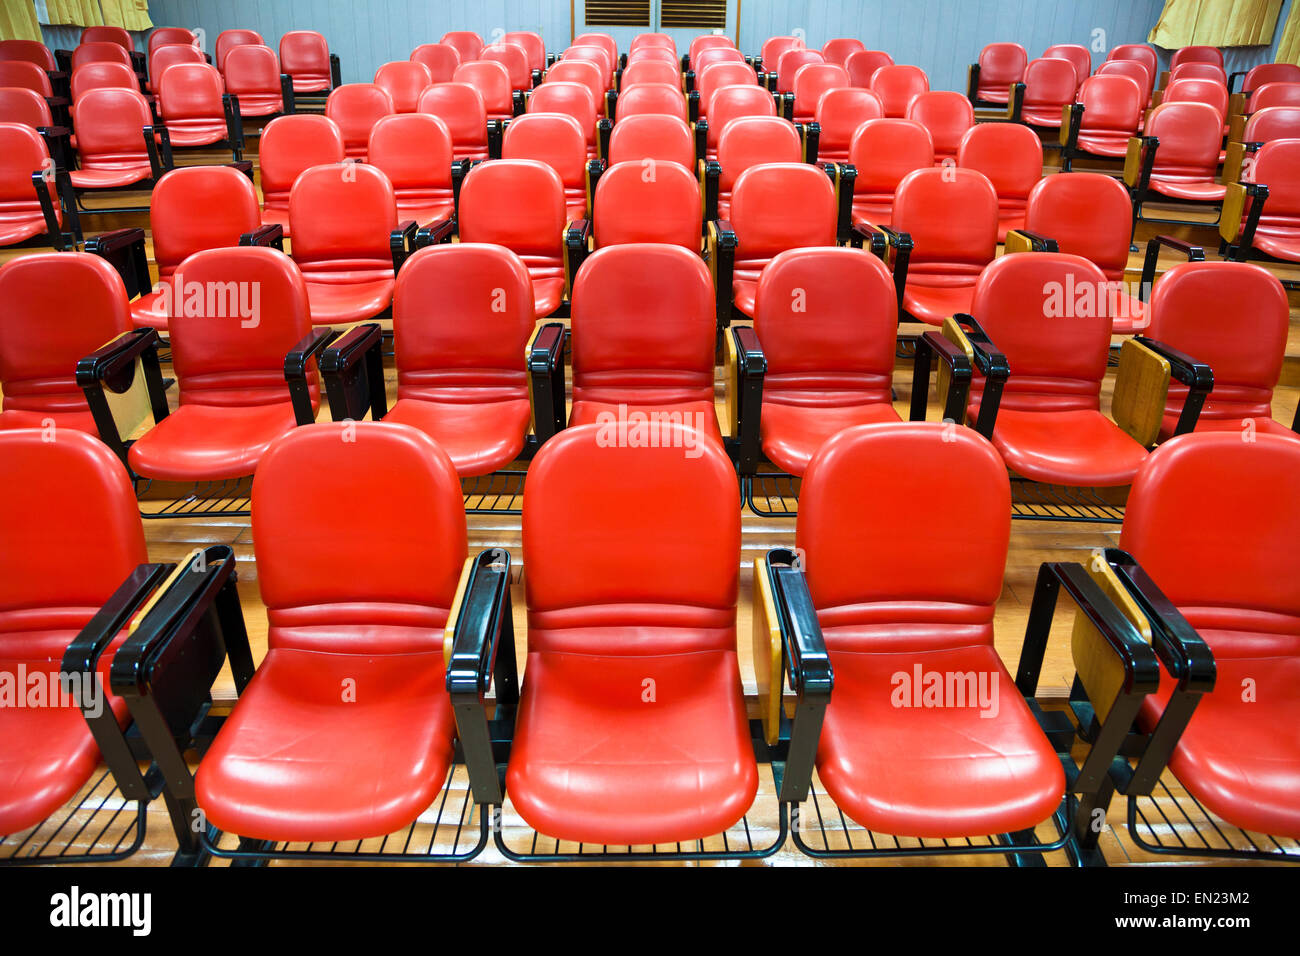 Interior of empty conference hall with red chairs Stock Photo